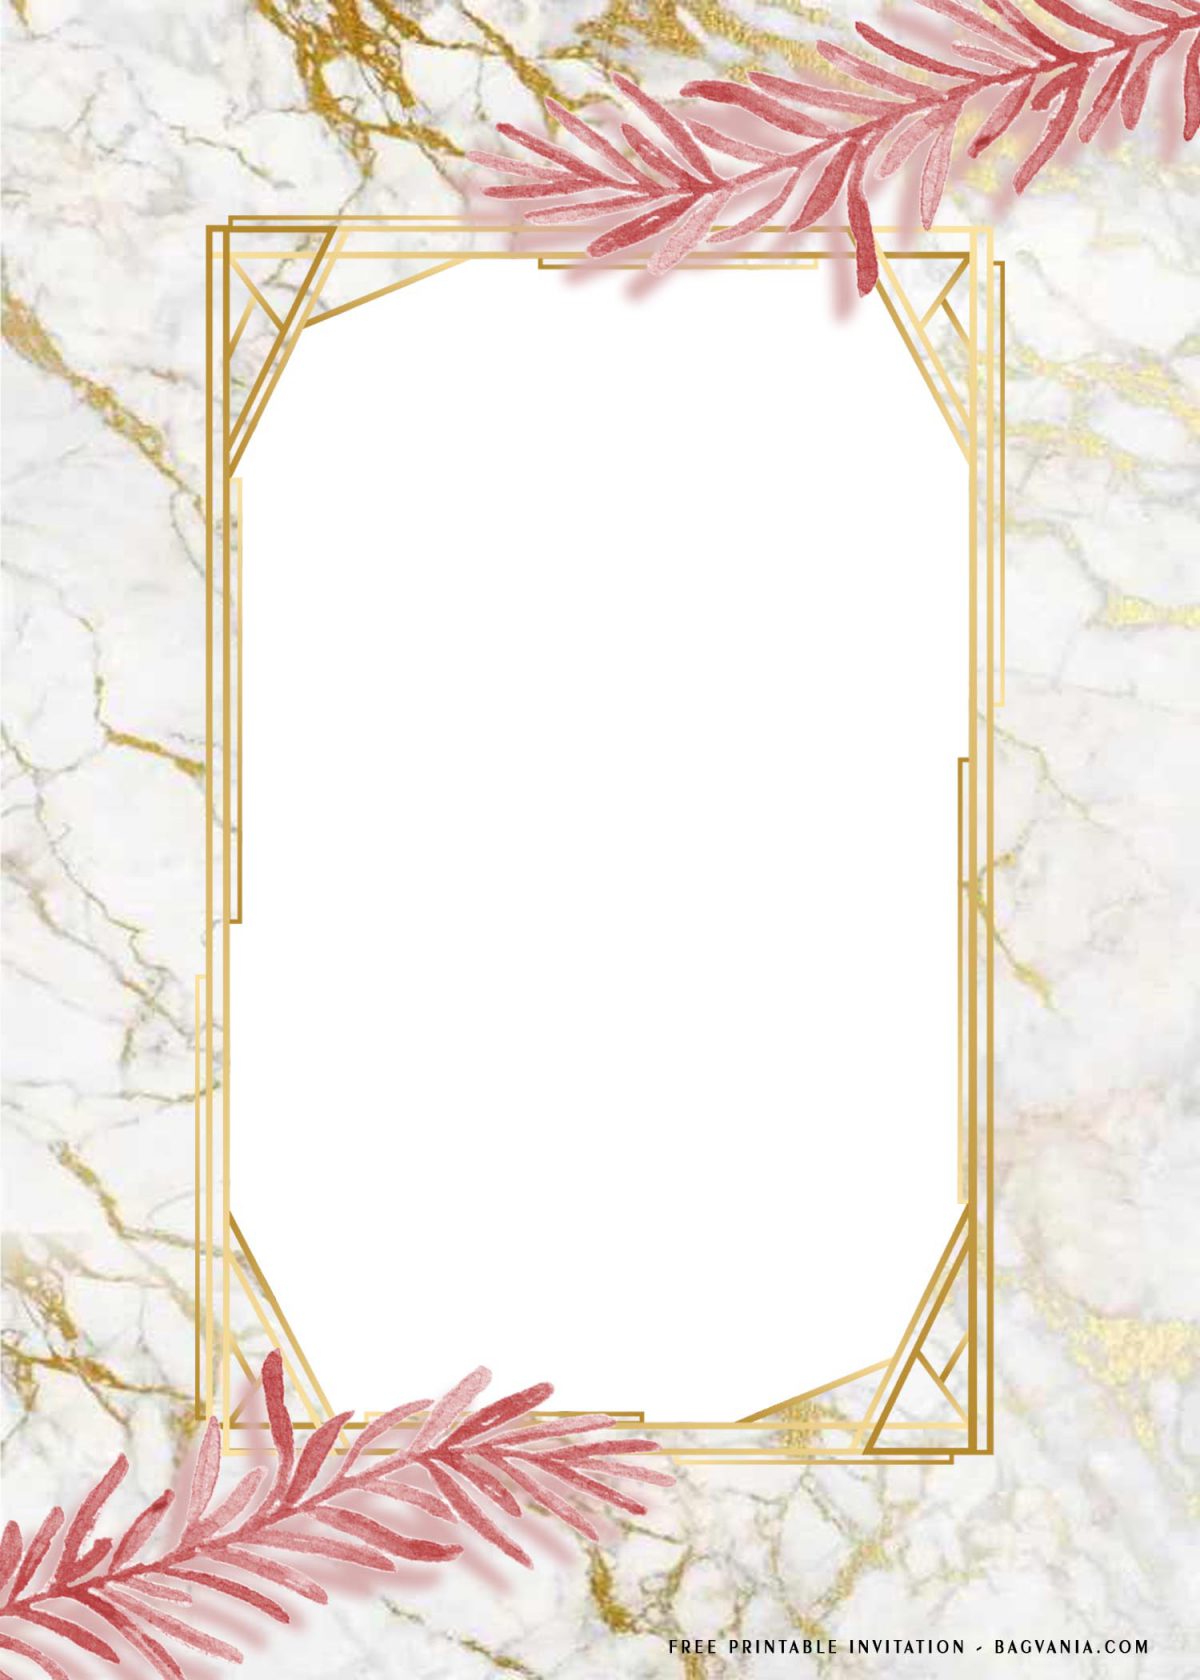 Free Printable Leafy Golden Frame Birthday Invitation Templates With Pink and Gold Marble Background